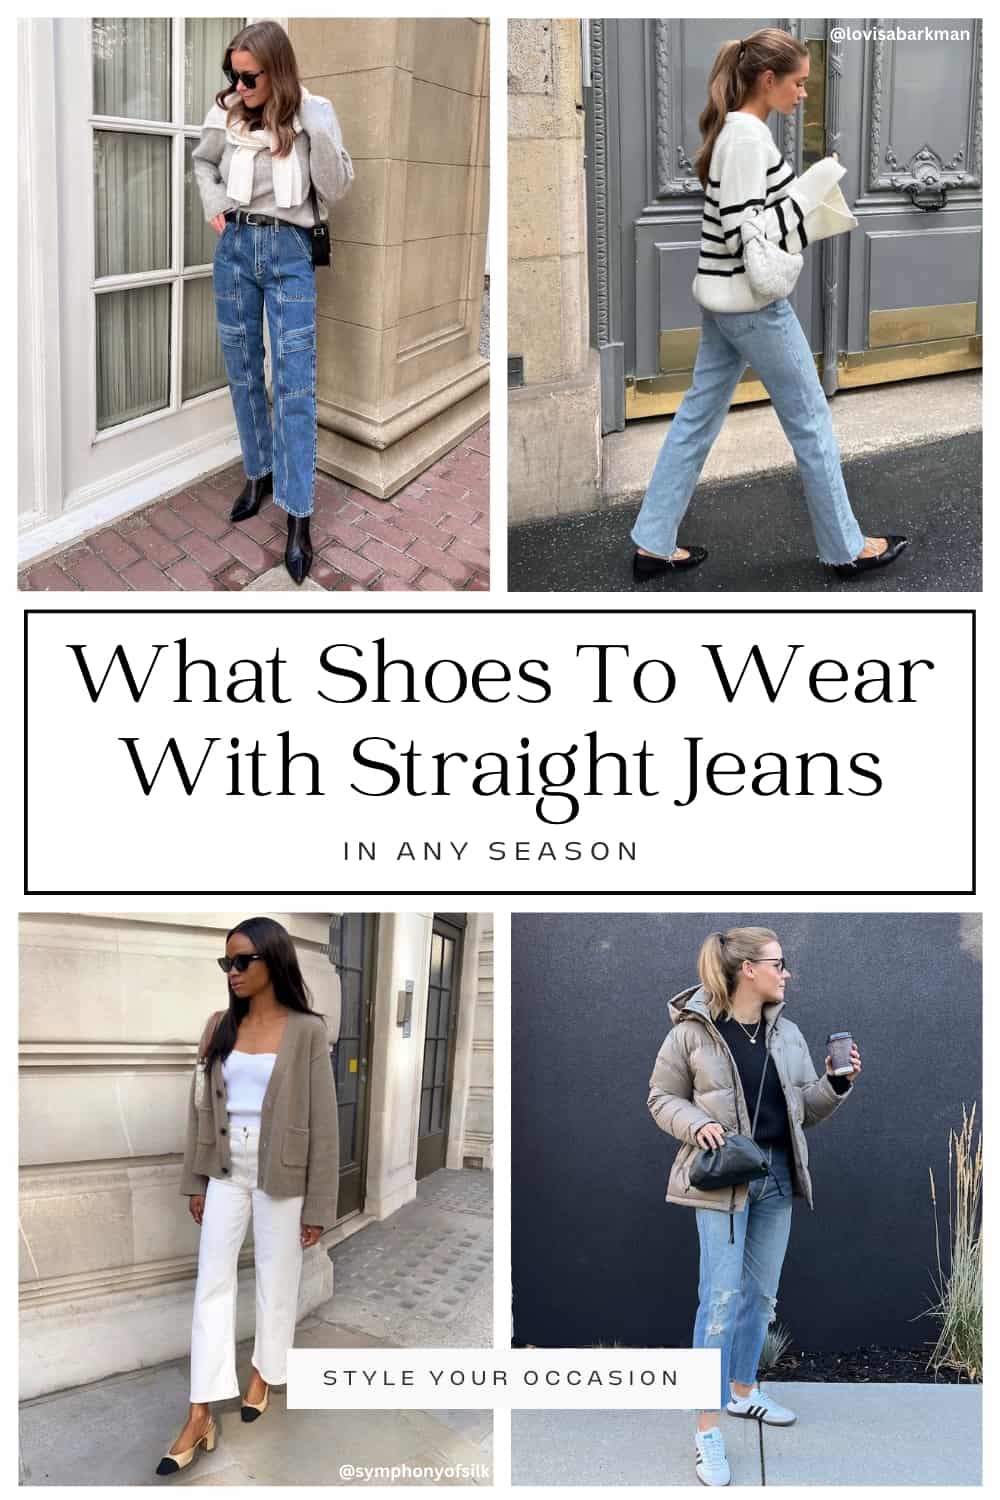 collage of four women wearing stylish outfits with different shoes and straight leg jeans